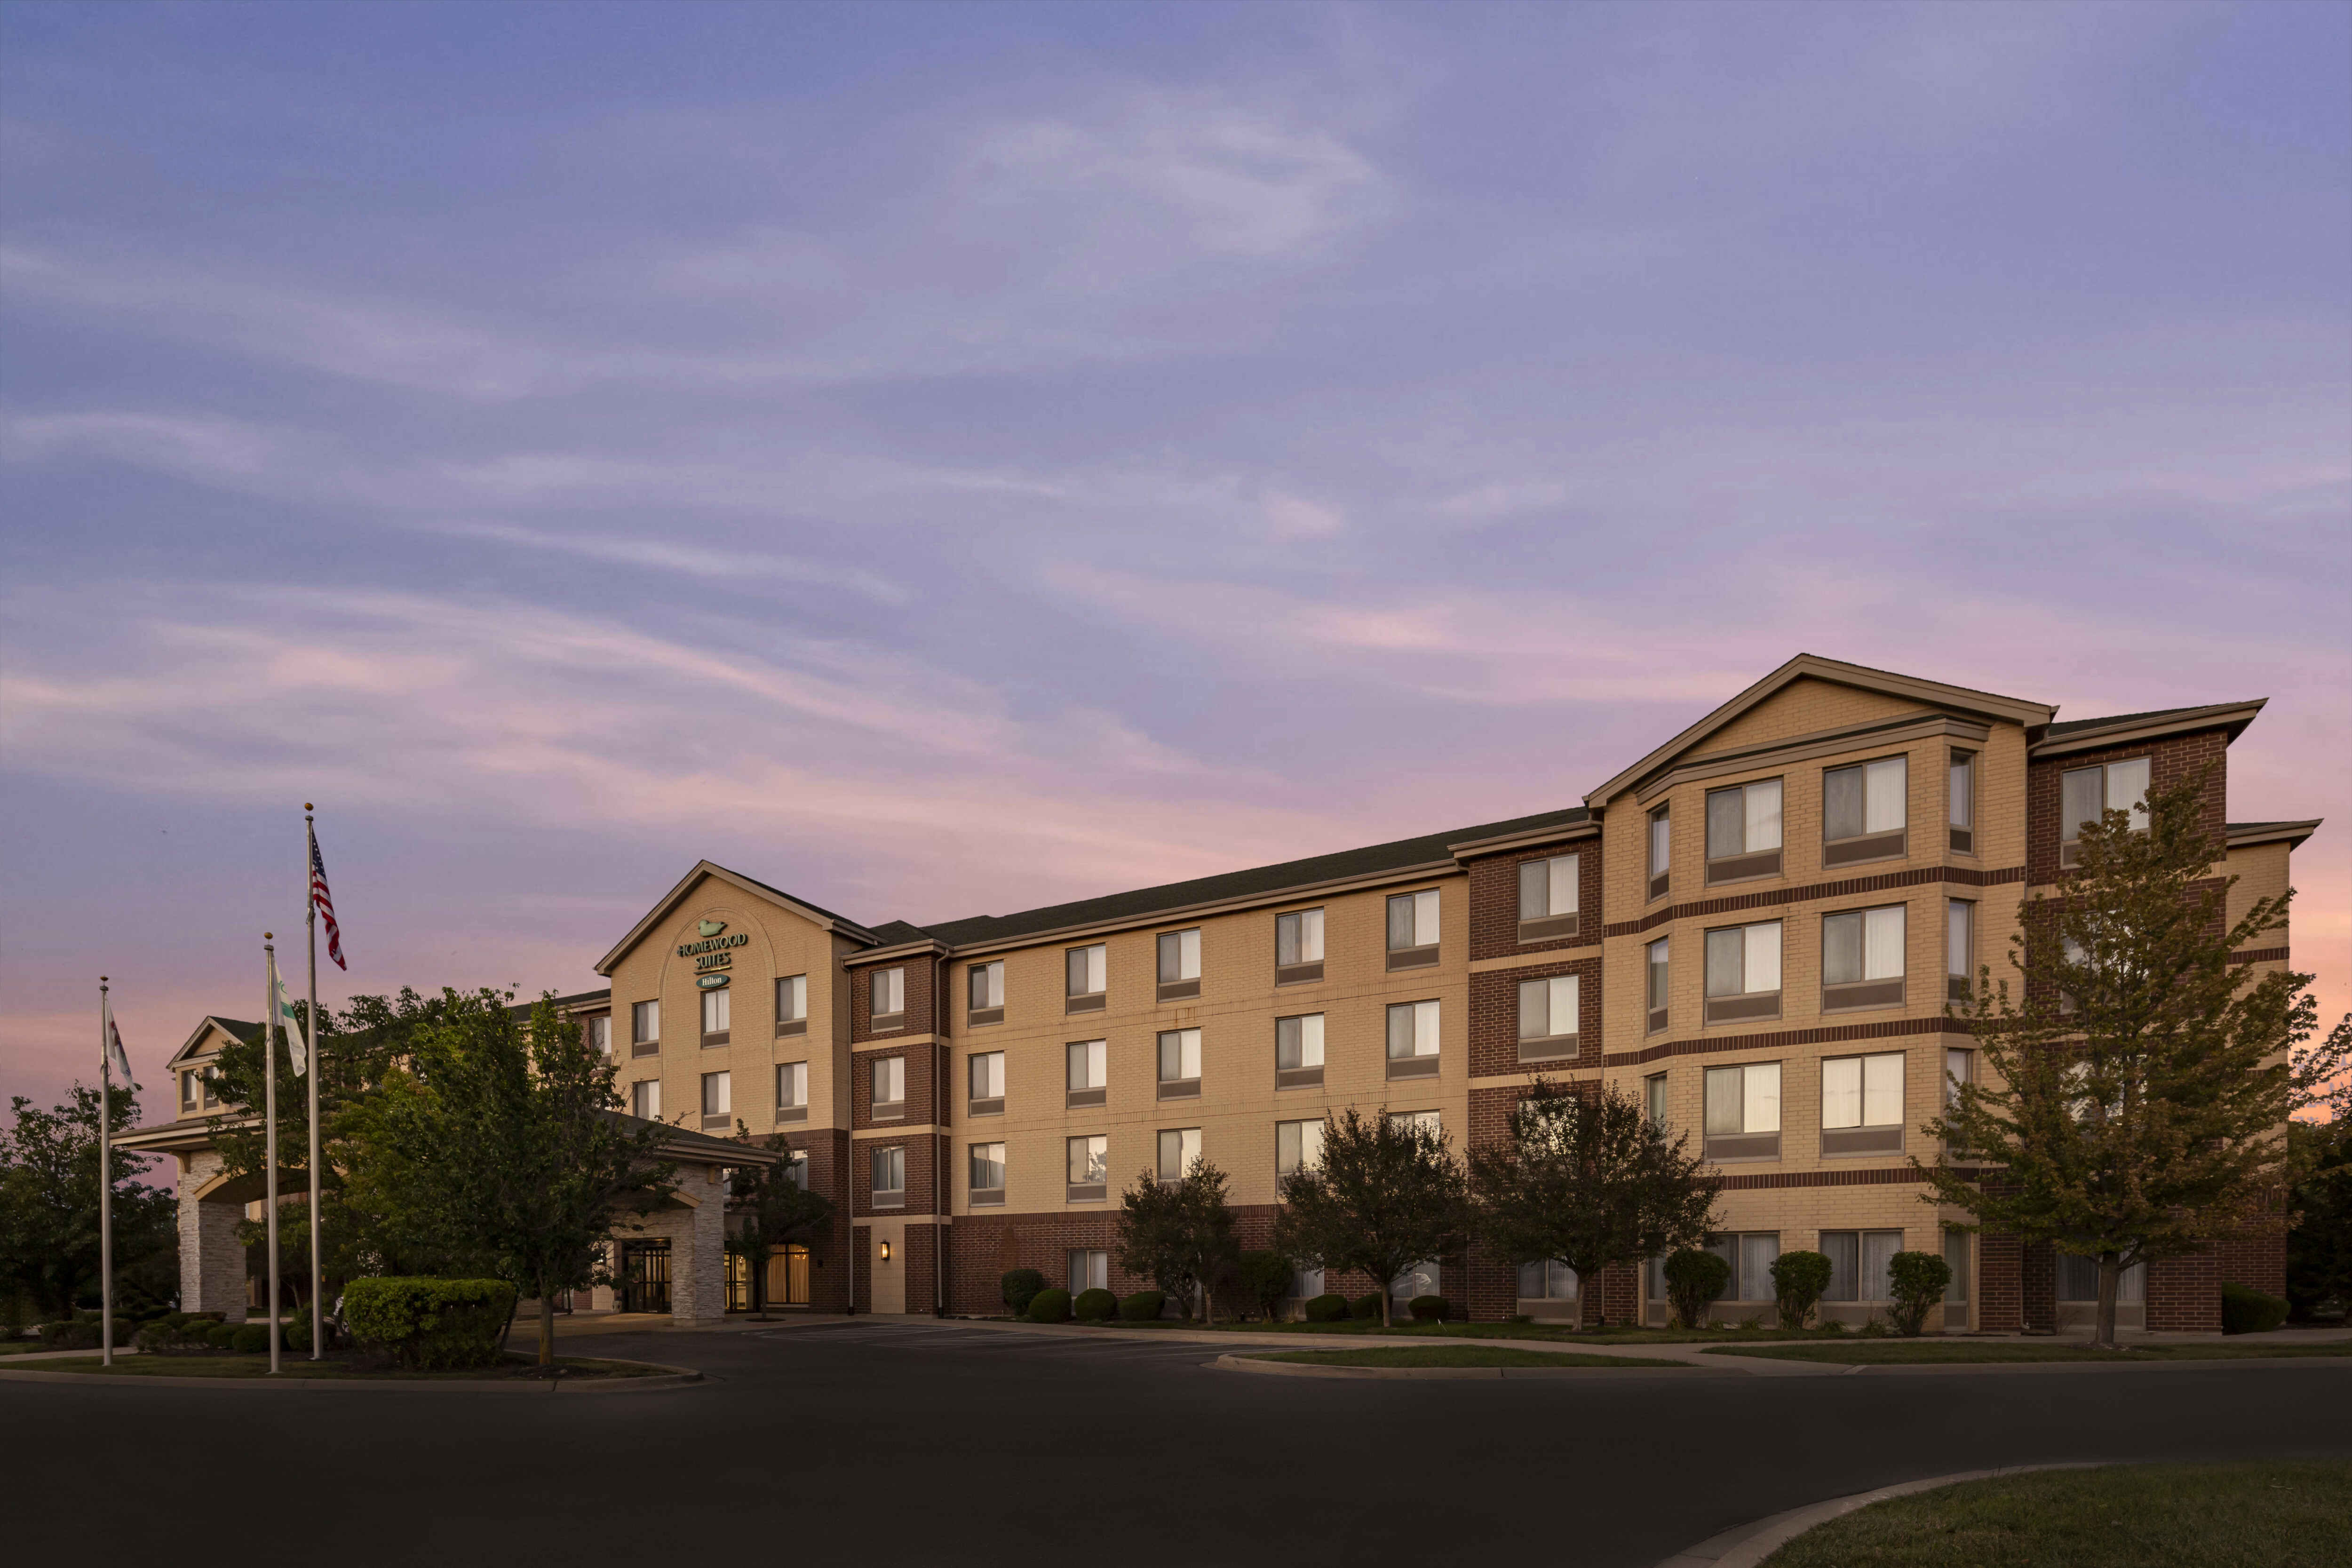 Photo of Homewood Suites by Hilton Orland Park, Orland Park, IL